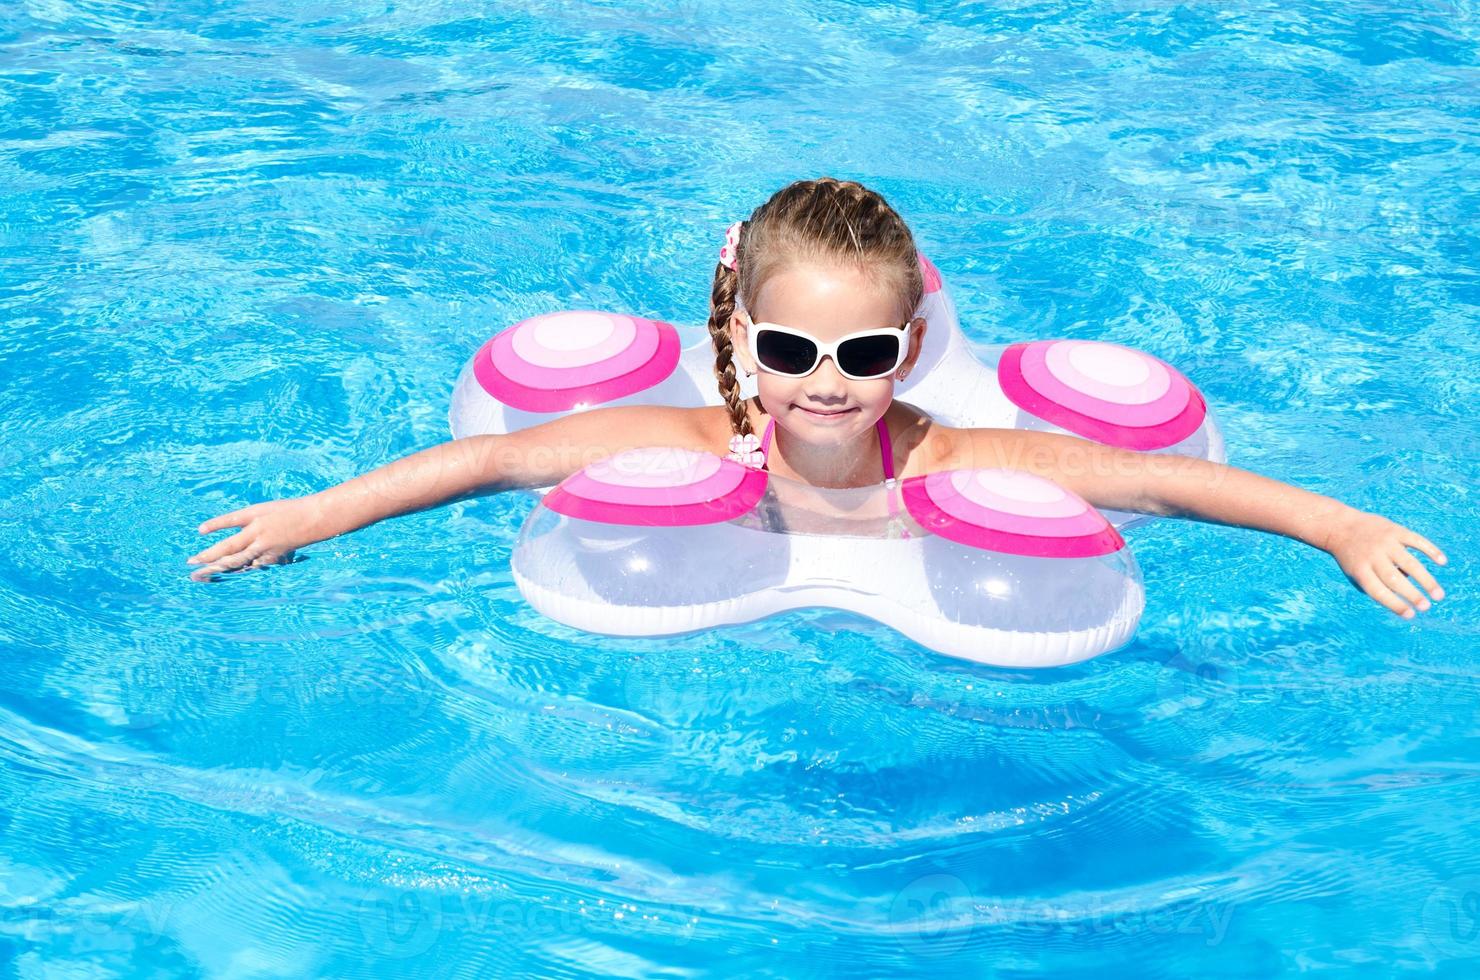 Smiling little girl in swimming pool photo